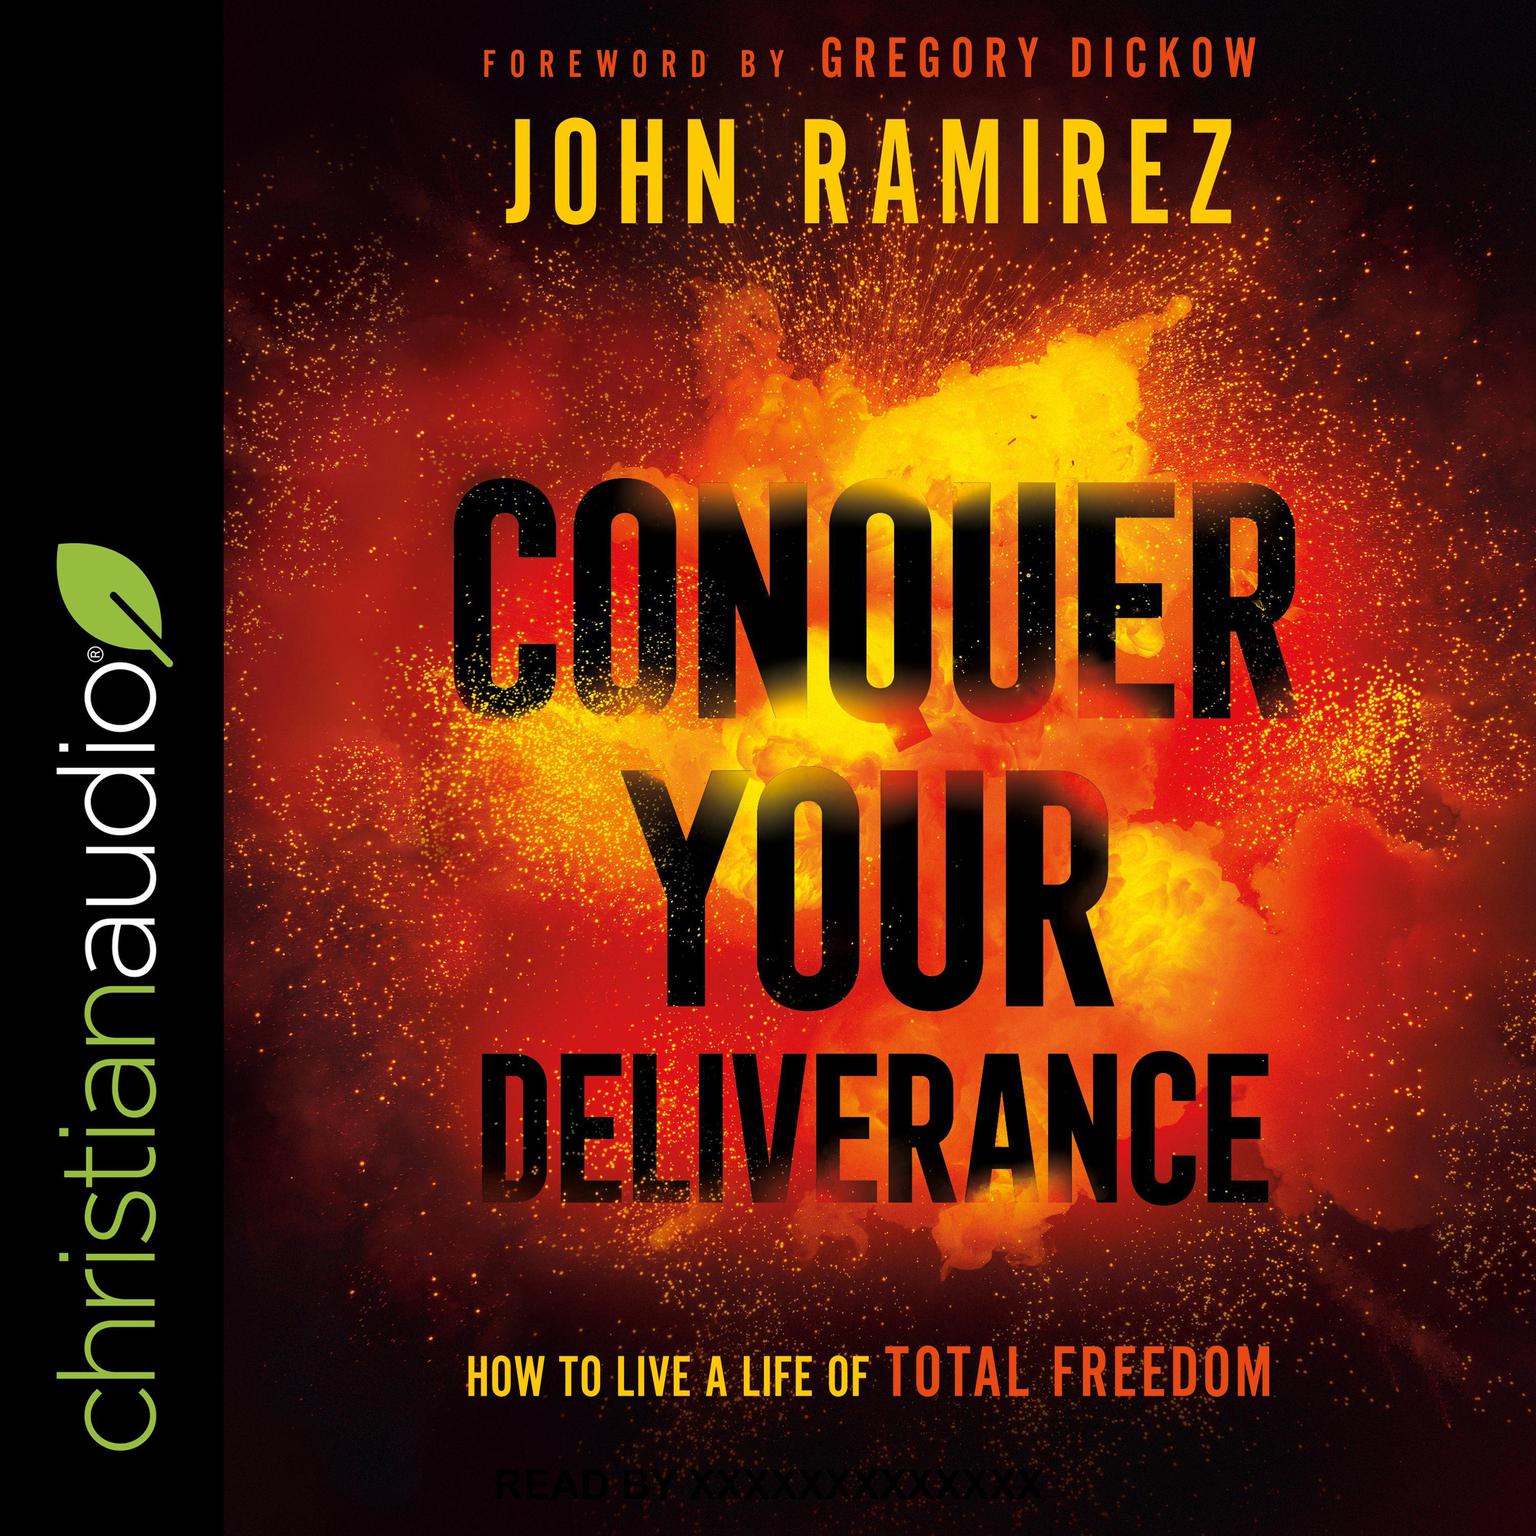 Conquer Your Deliverance: How to Live a Life of Total Freedom Audiobook, by John Ramirez